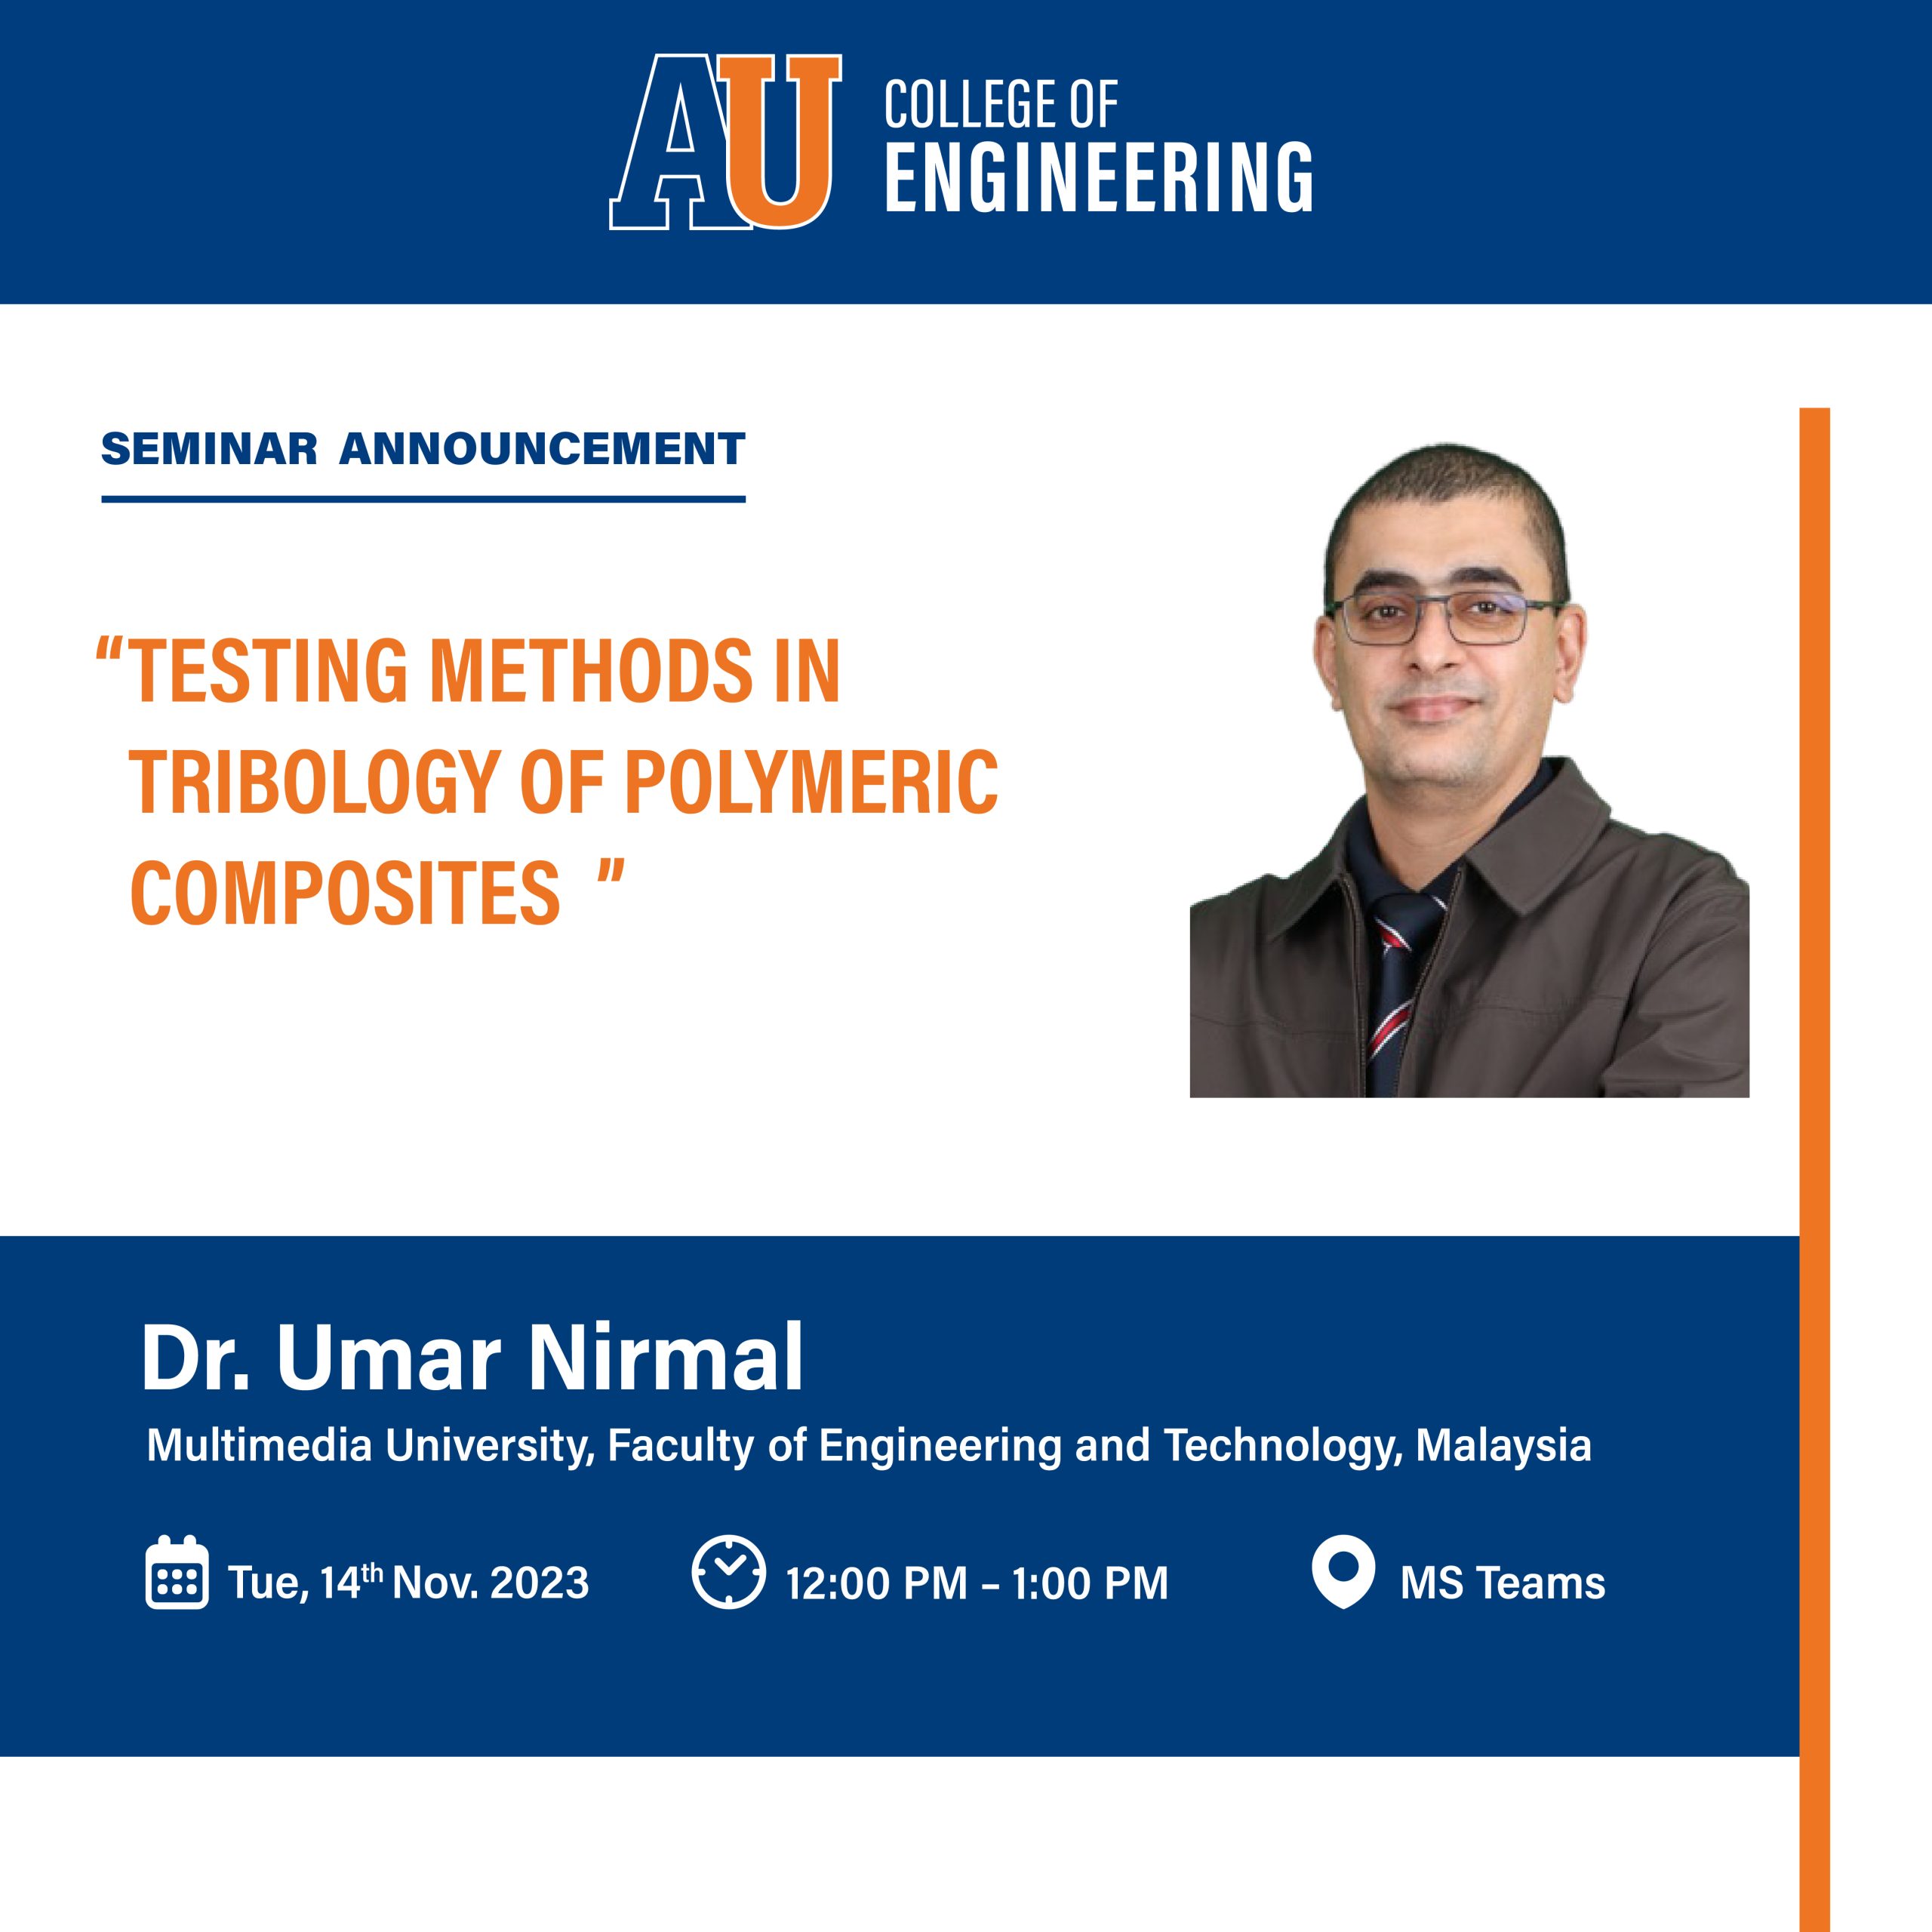 TESTING METHODS IN TRIBOLOGY OF POLYMERIC COMPOSITES